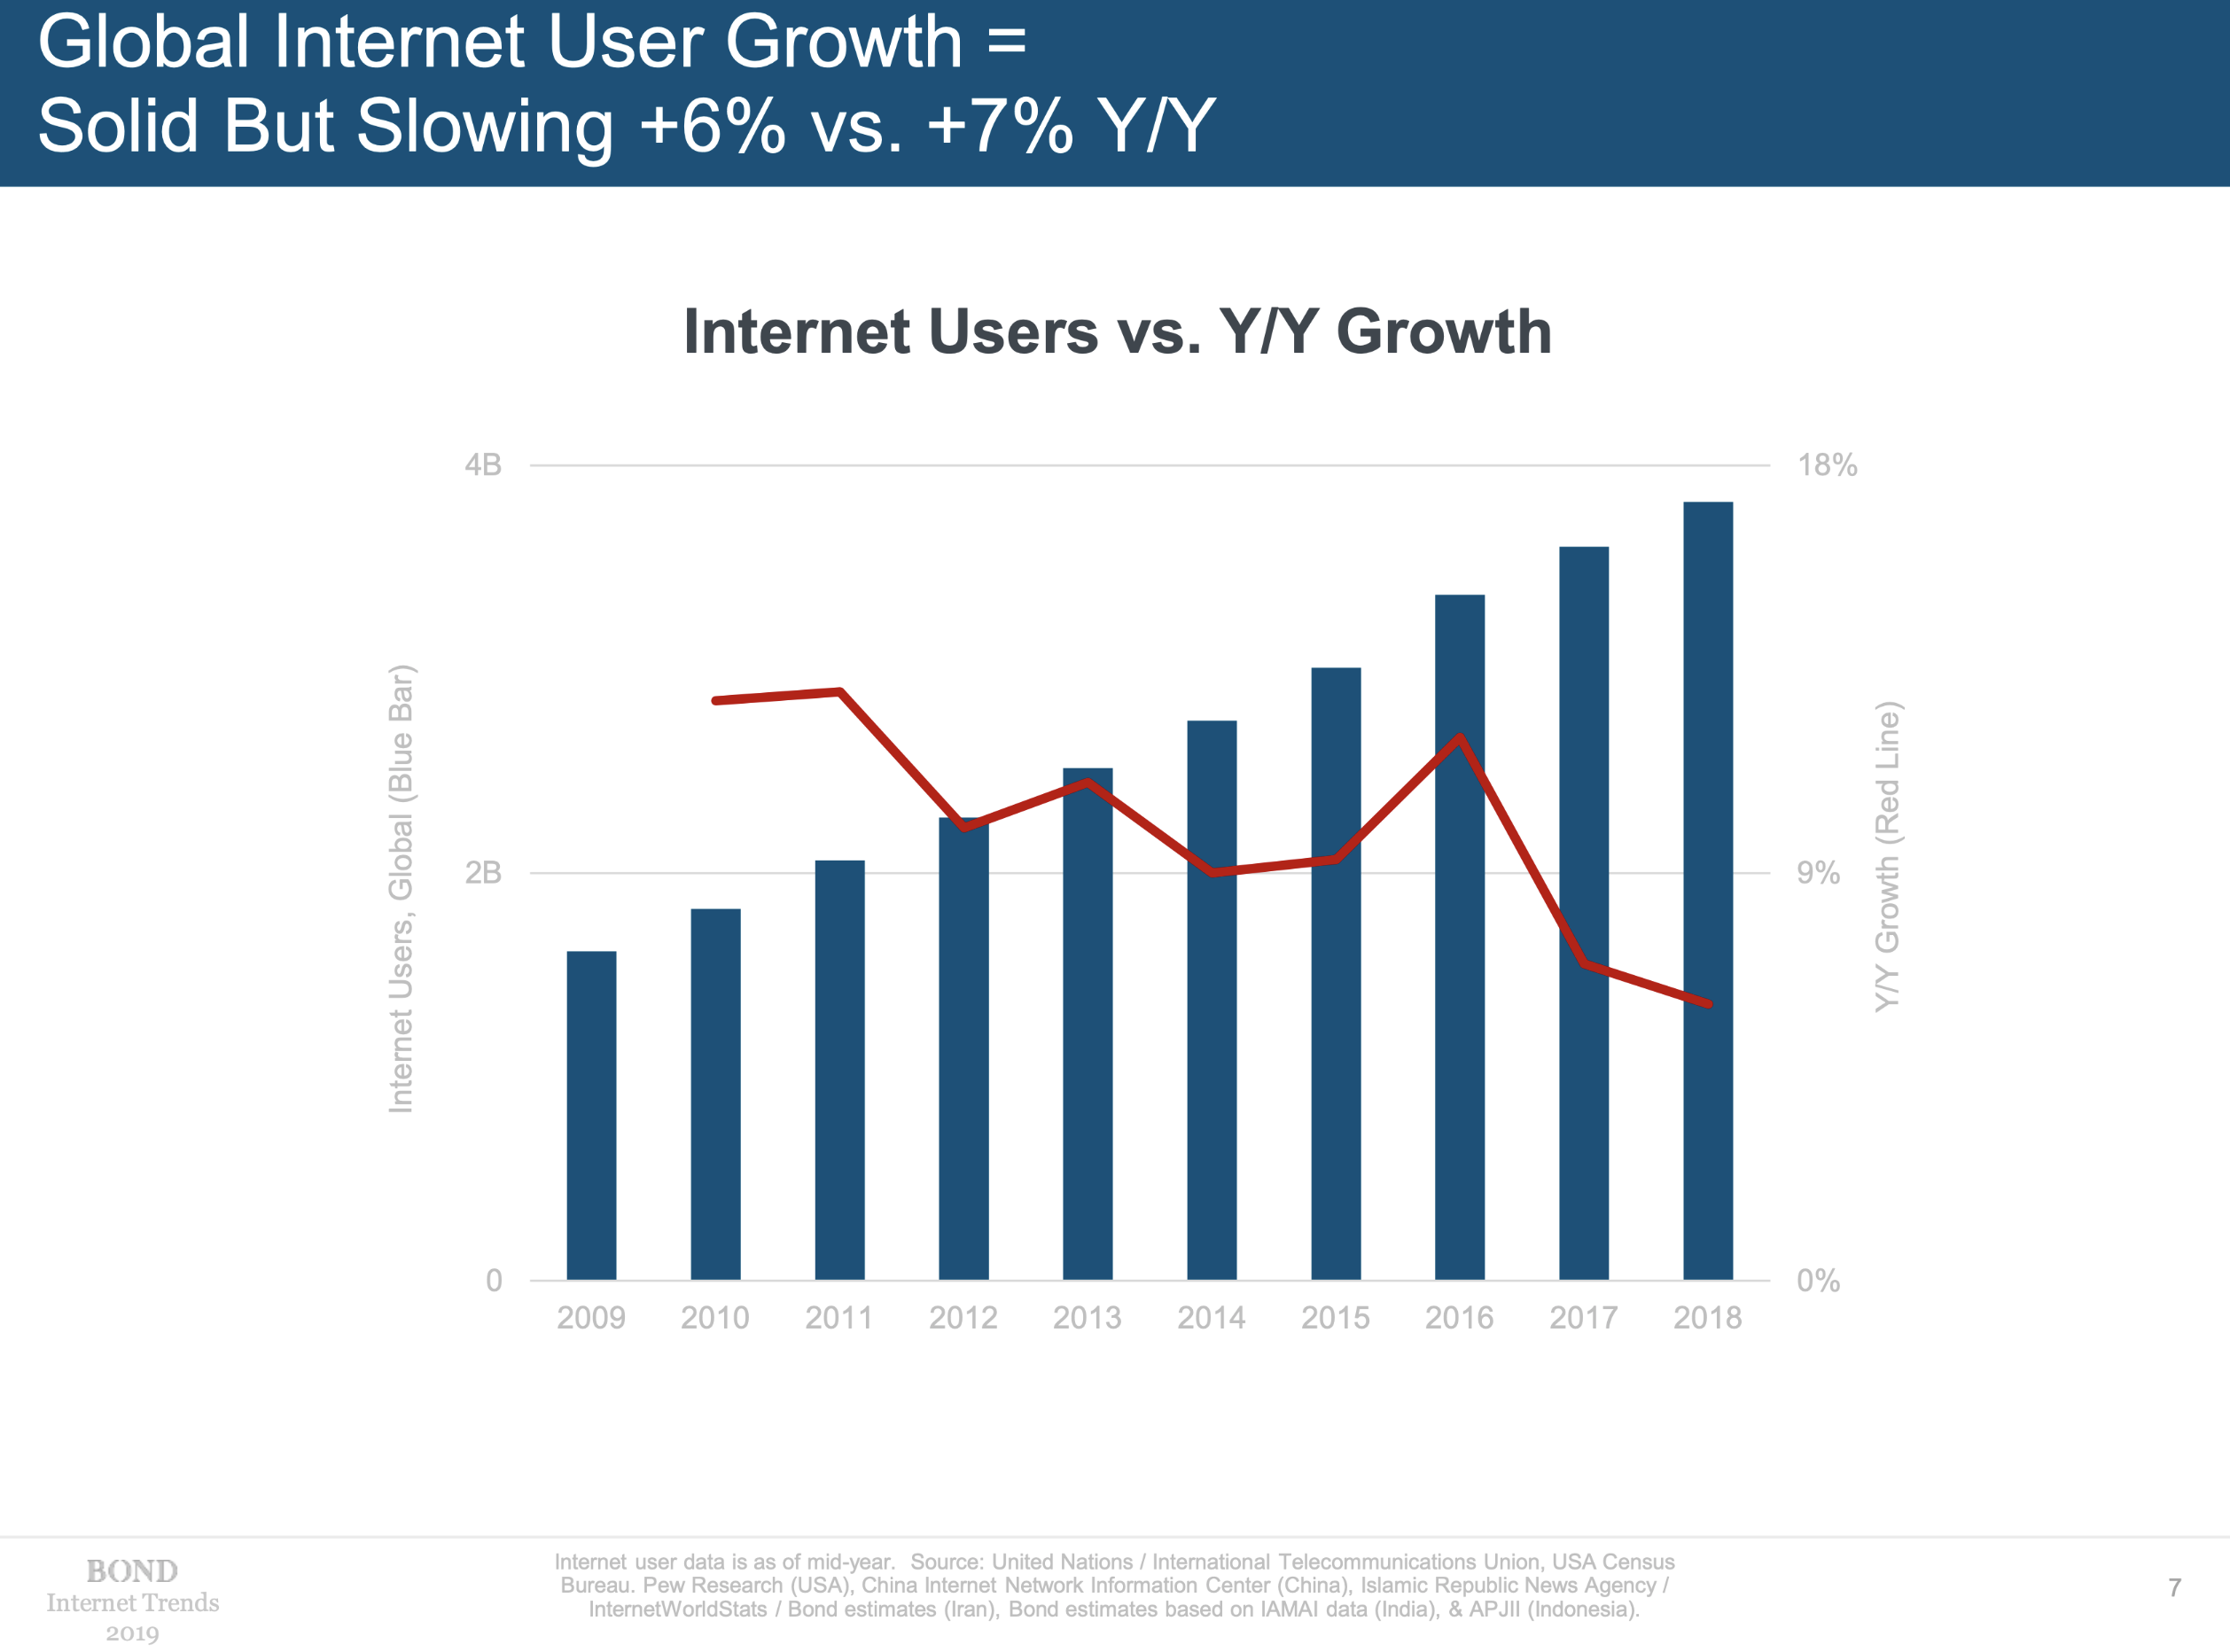 Mary Meeker's Trends Report highlights declining smartphone